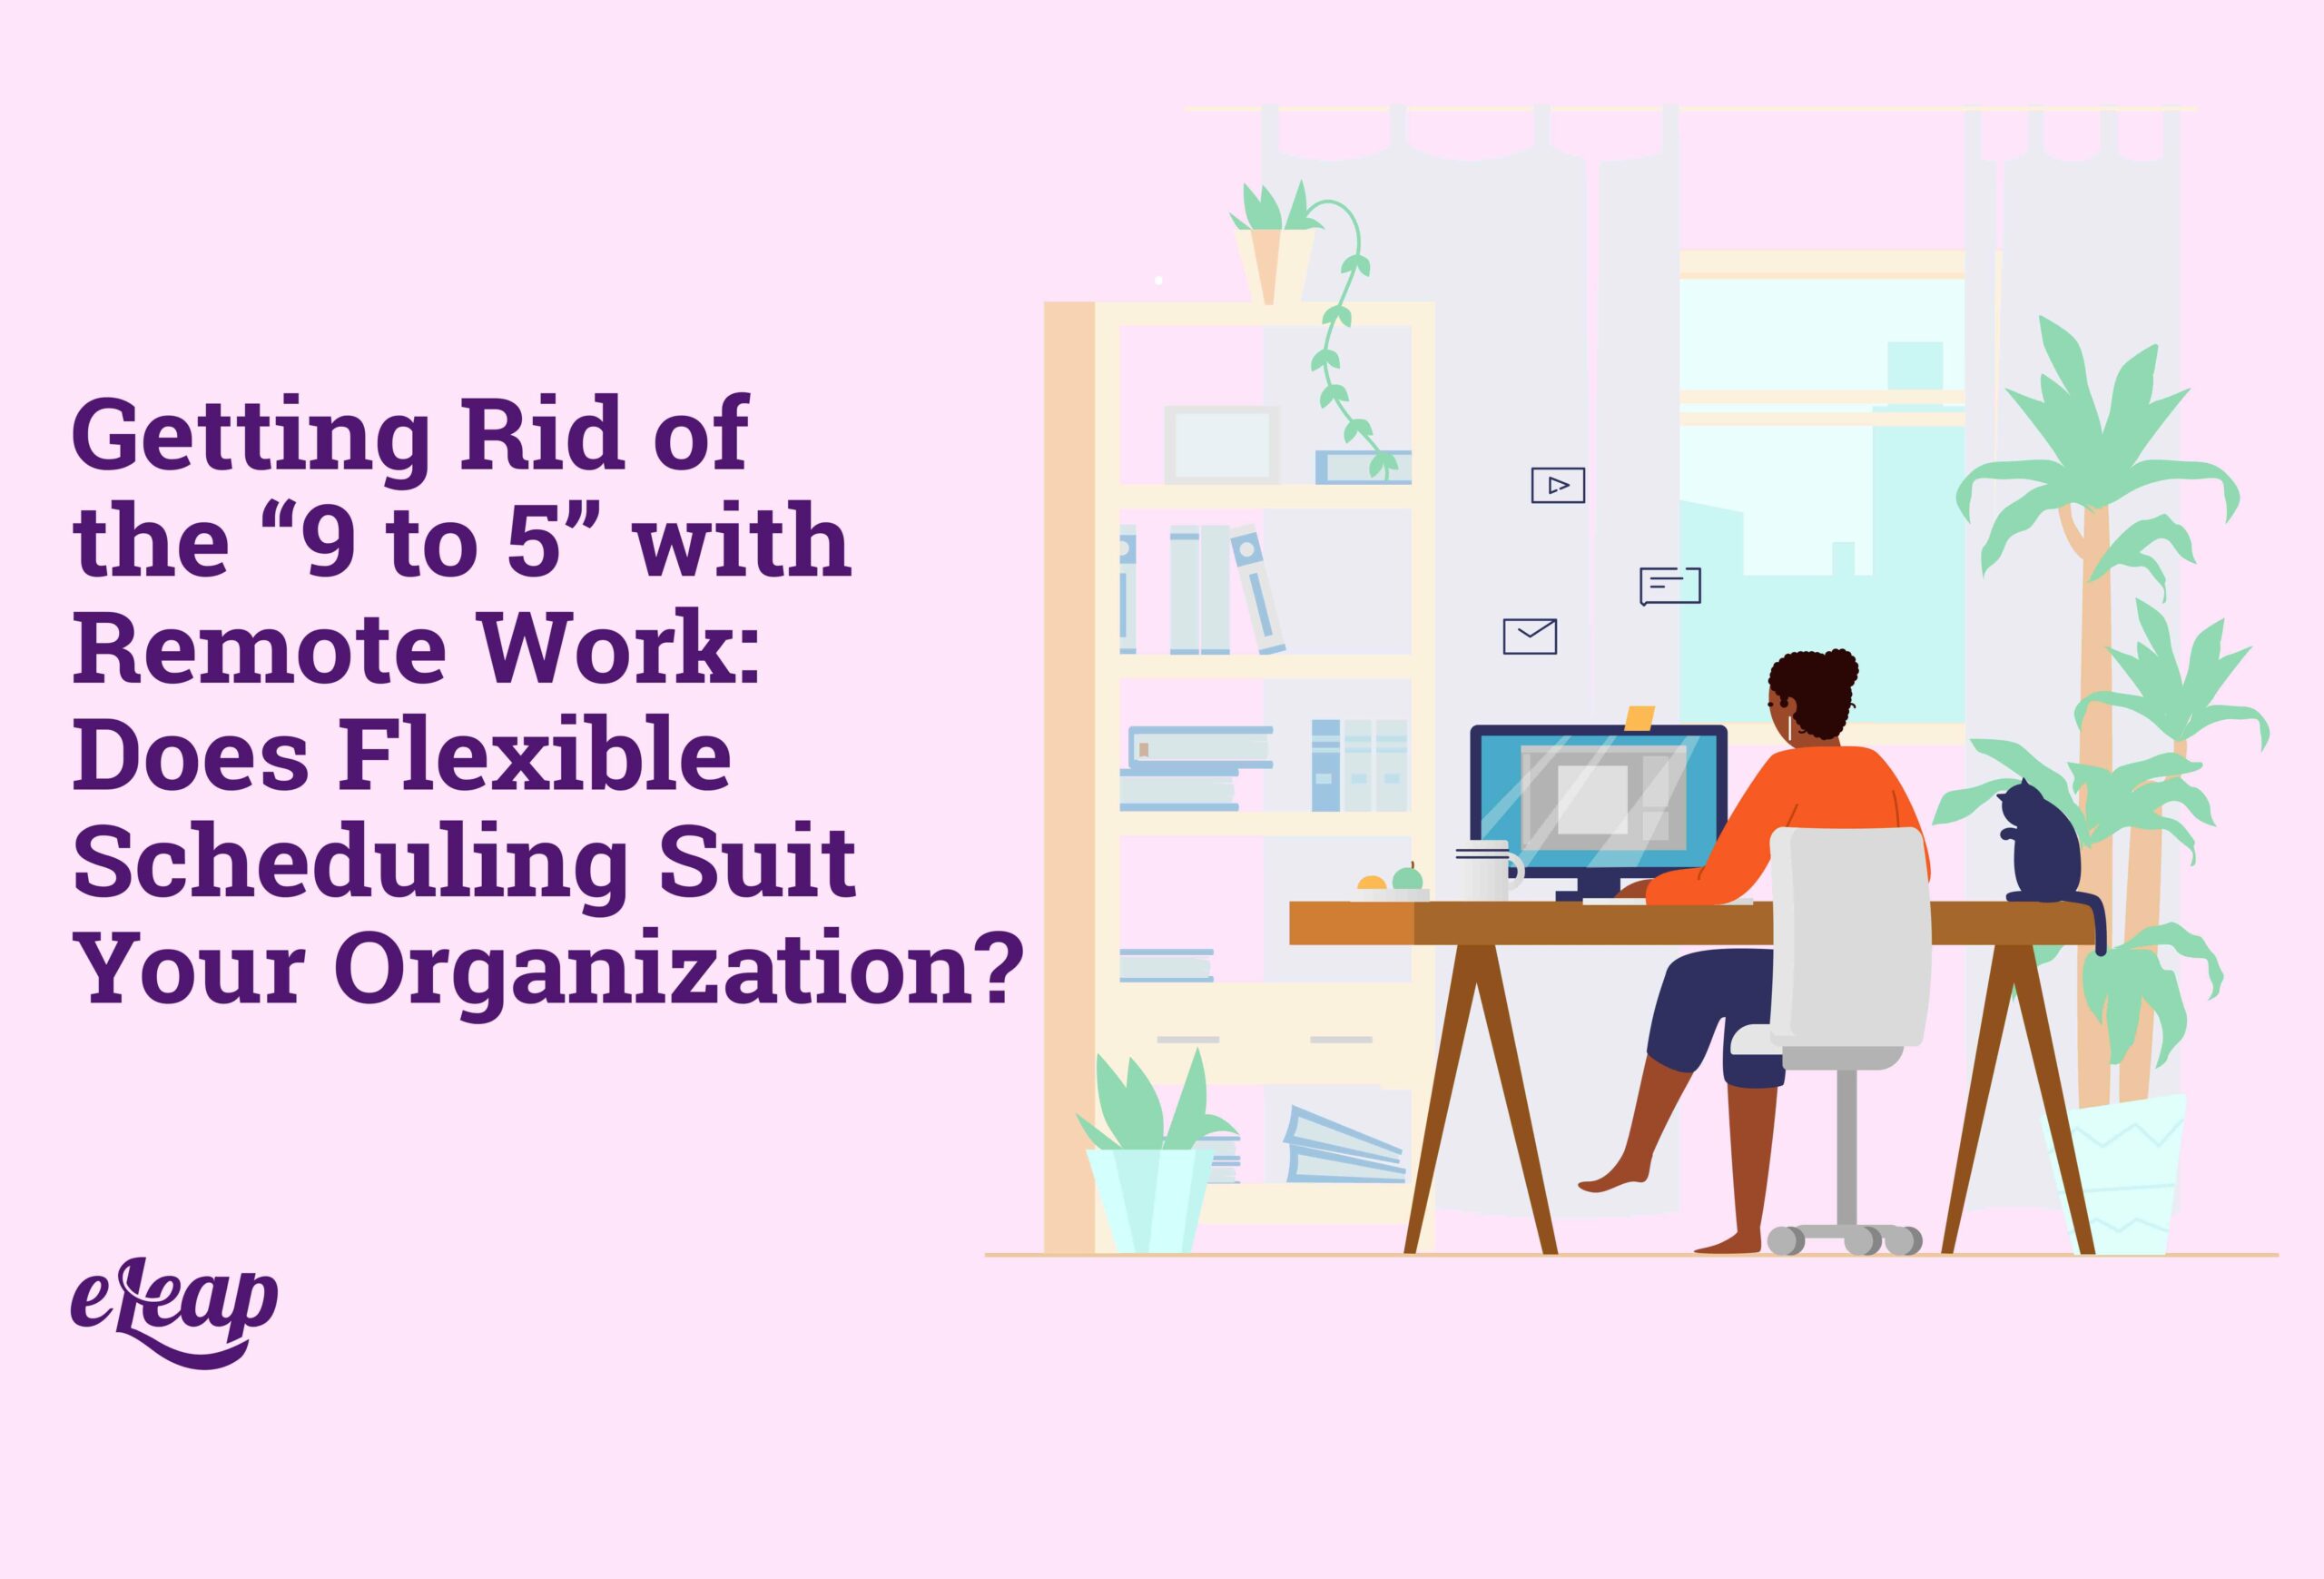 Getting Rid of the “9 to 5” with Remote Work: Does Flexible Scheduling Suit Your Organization?